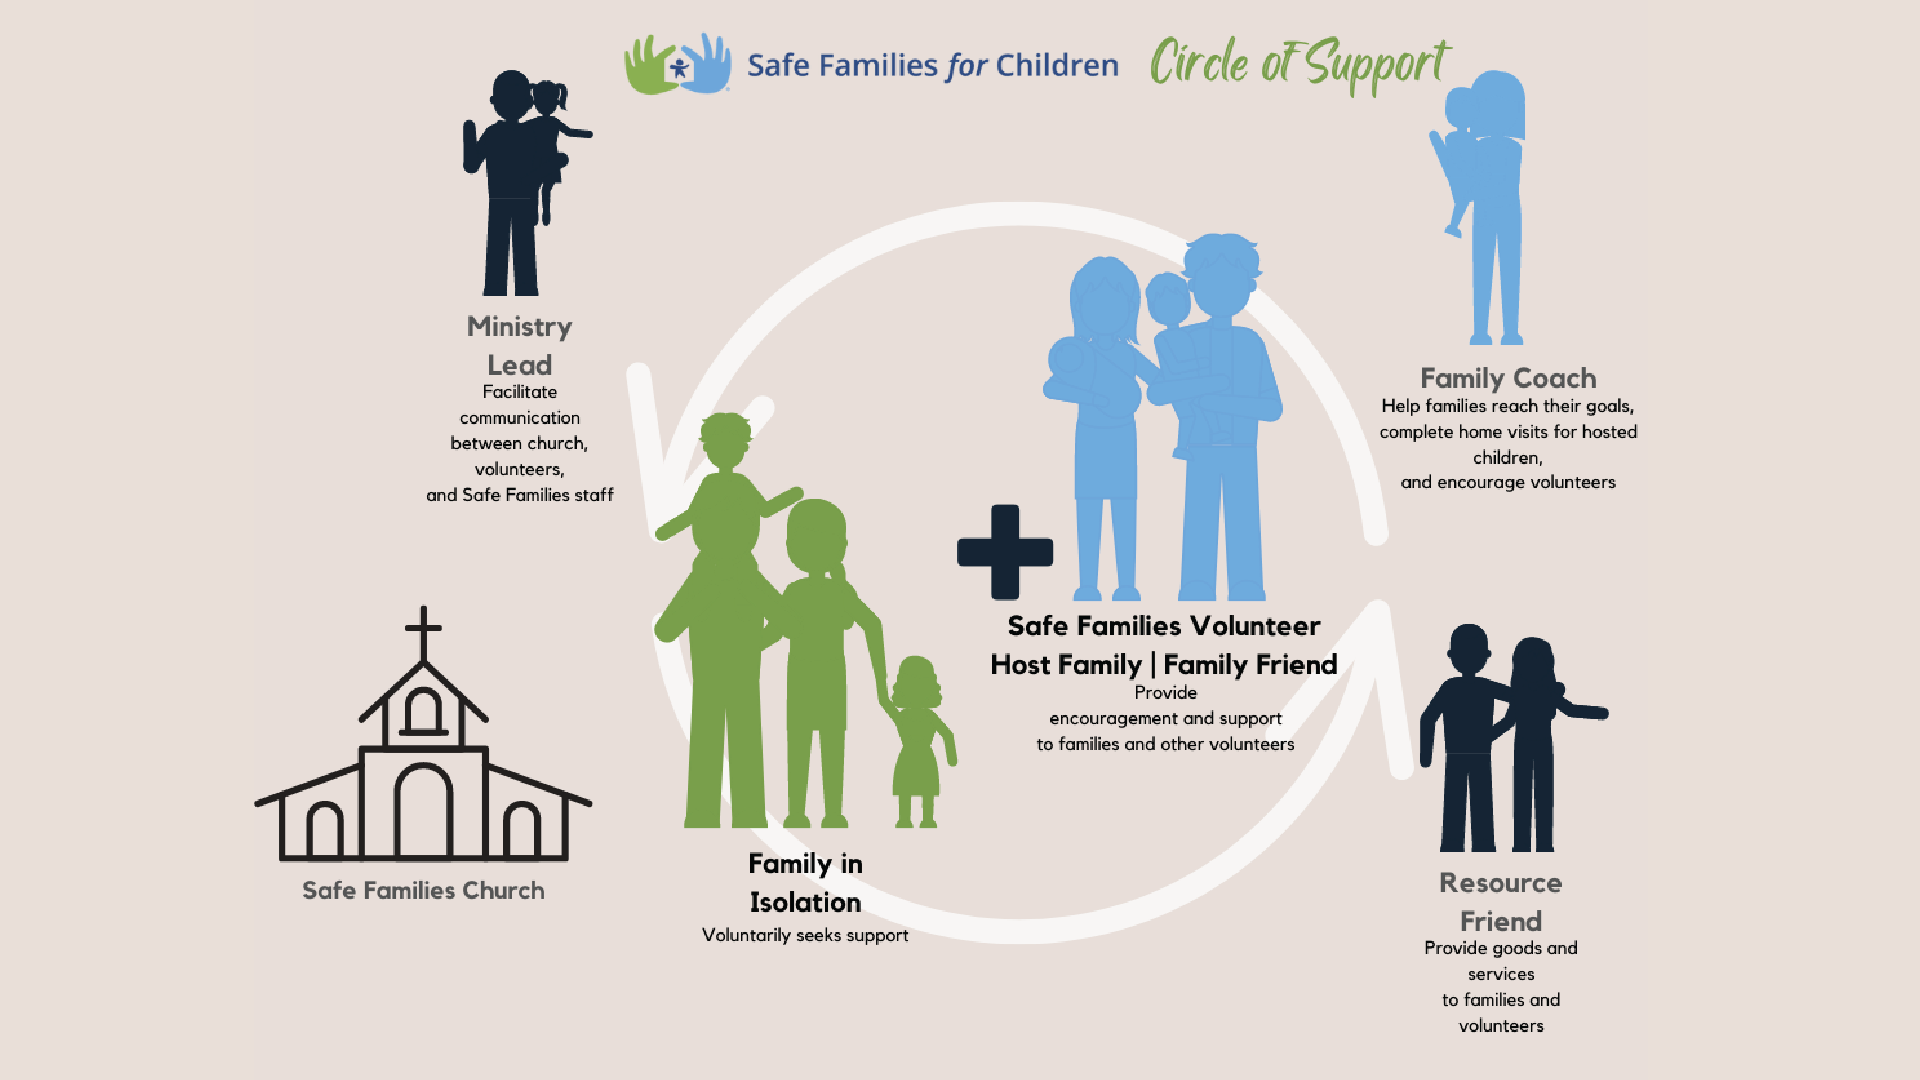 Relief through Relationship: A Focus on Safe Families